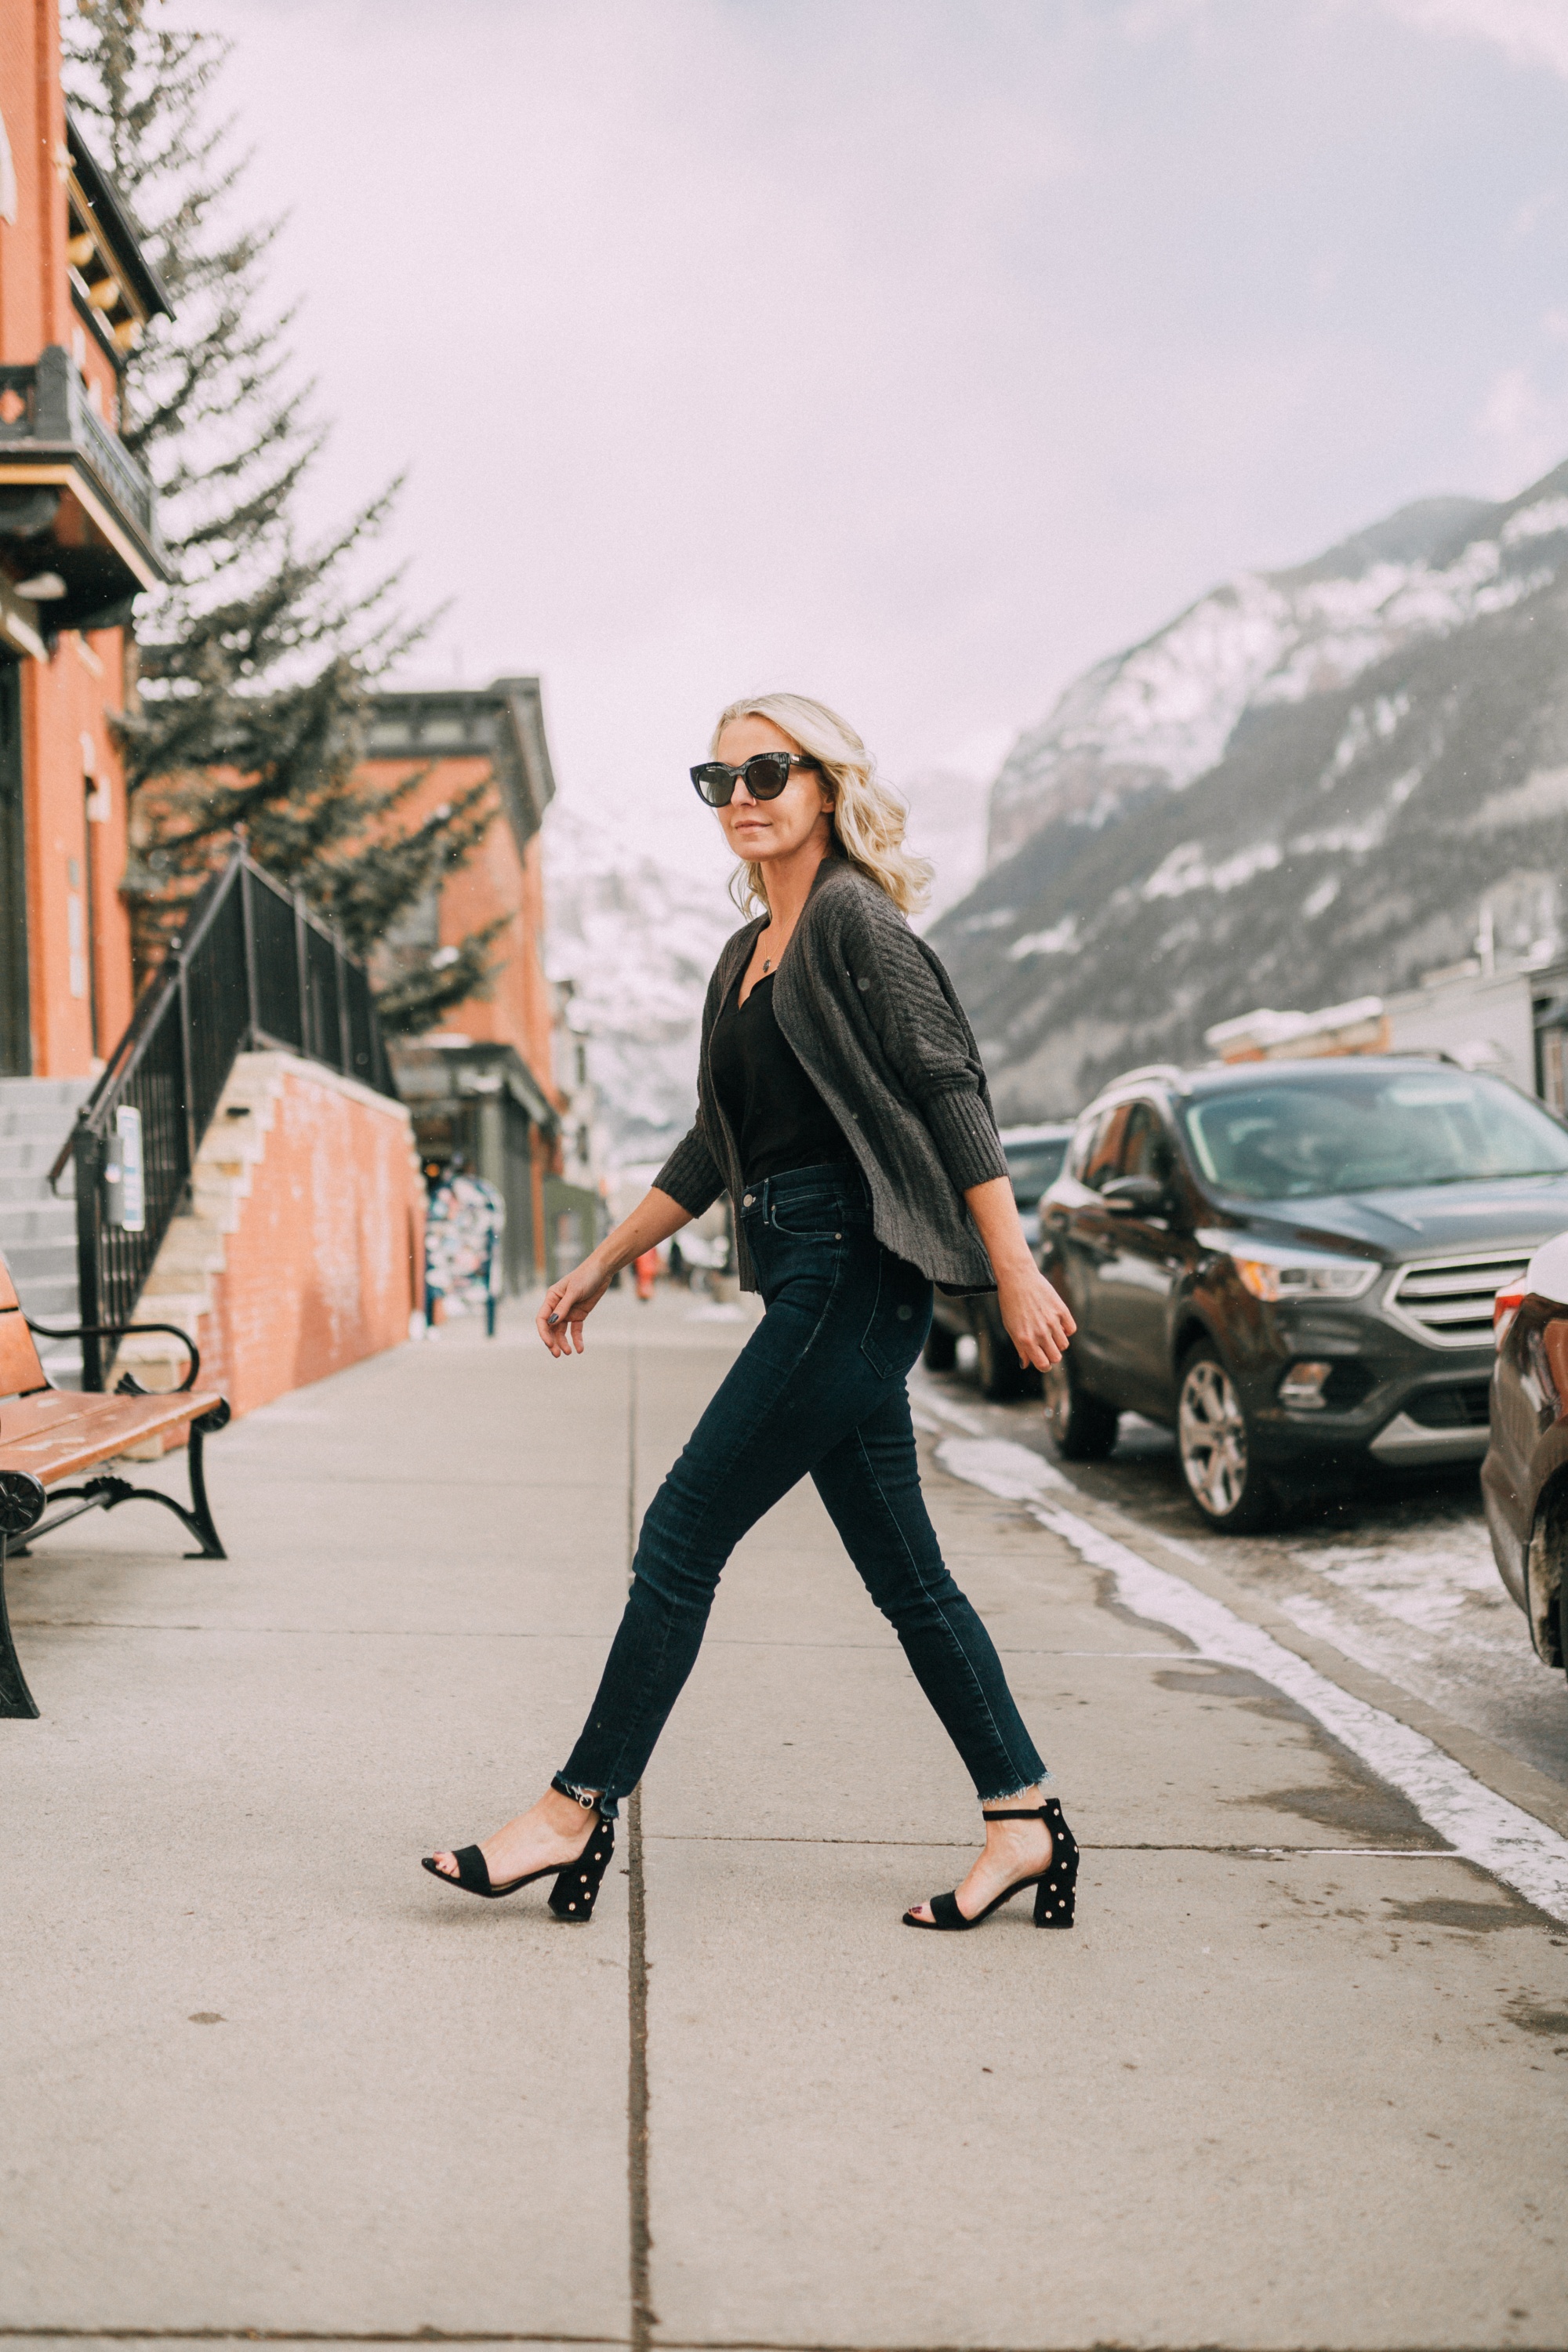 Fashion blogger over 40 Erin Busbee of busbeestyle.com wearing dark wash skinny jeans, a black scalloped cami, and heeled black sandals with a Barefoot dreams shrug from QCV, walking in Telluride, Colorado